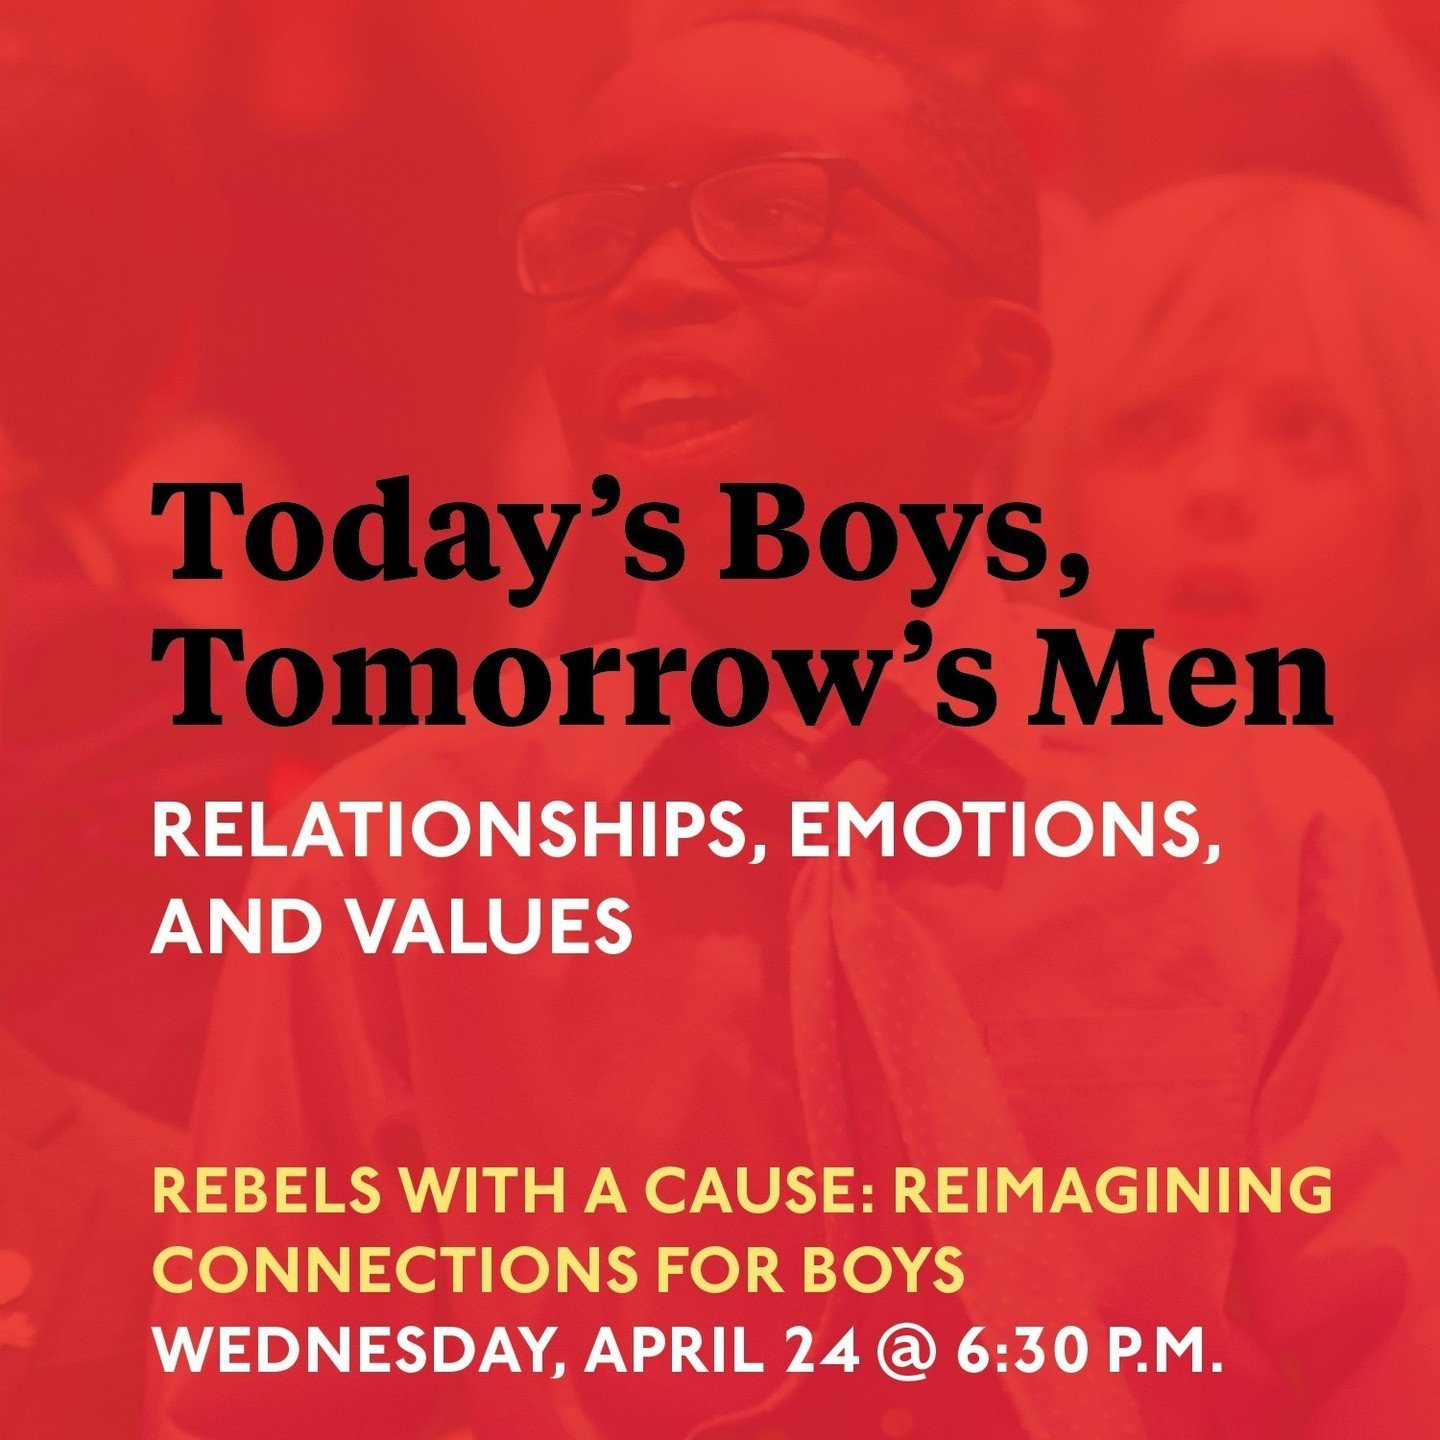 Join us for the final 2023-24 installment of our &quot;Today&rsquo;s Boys, Tomorrow&rsquo;s Men Speakers&rsquo; Series&quot; on April 24, at 6:30 p.m. We are thrilled to have Dr. Niobe Way, a distinguished developmental psychologist from NYU, as our 